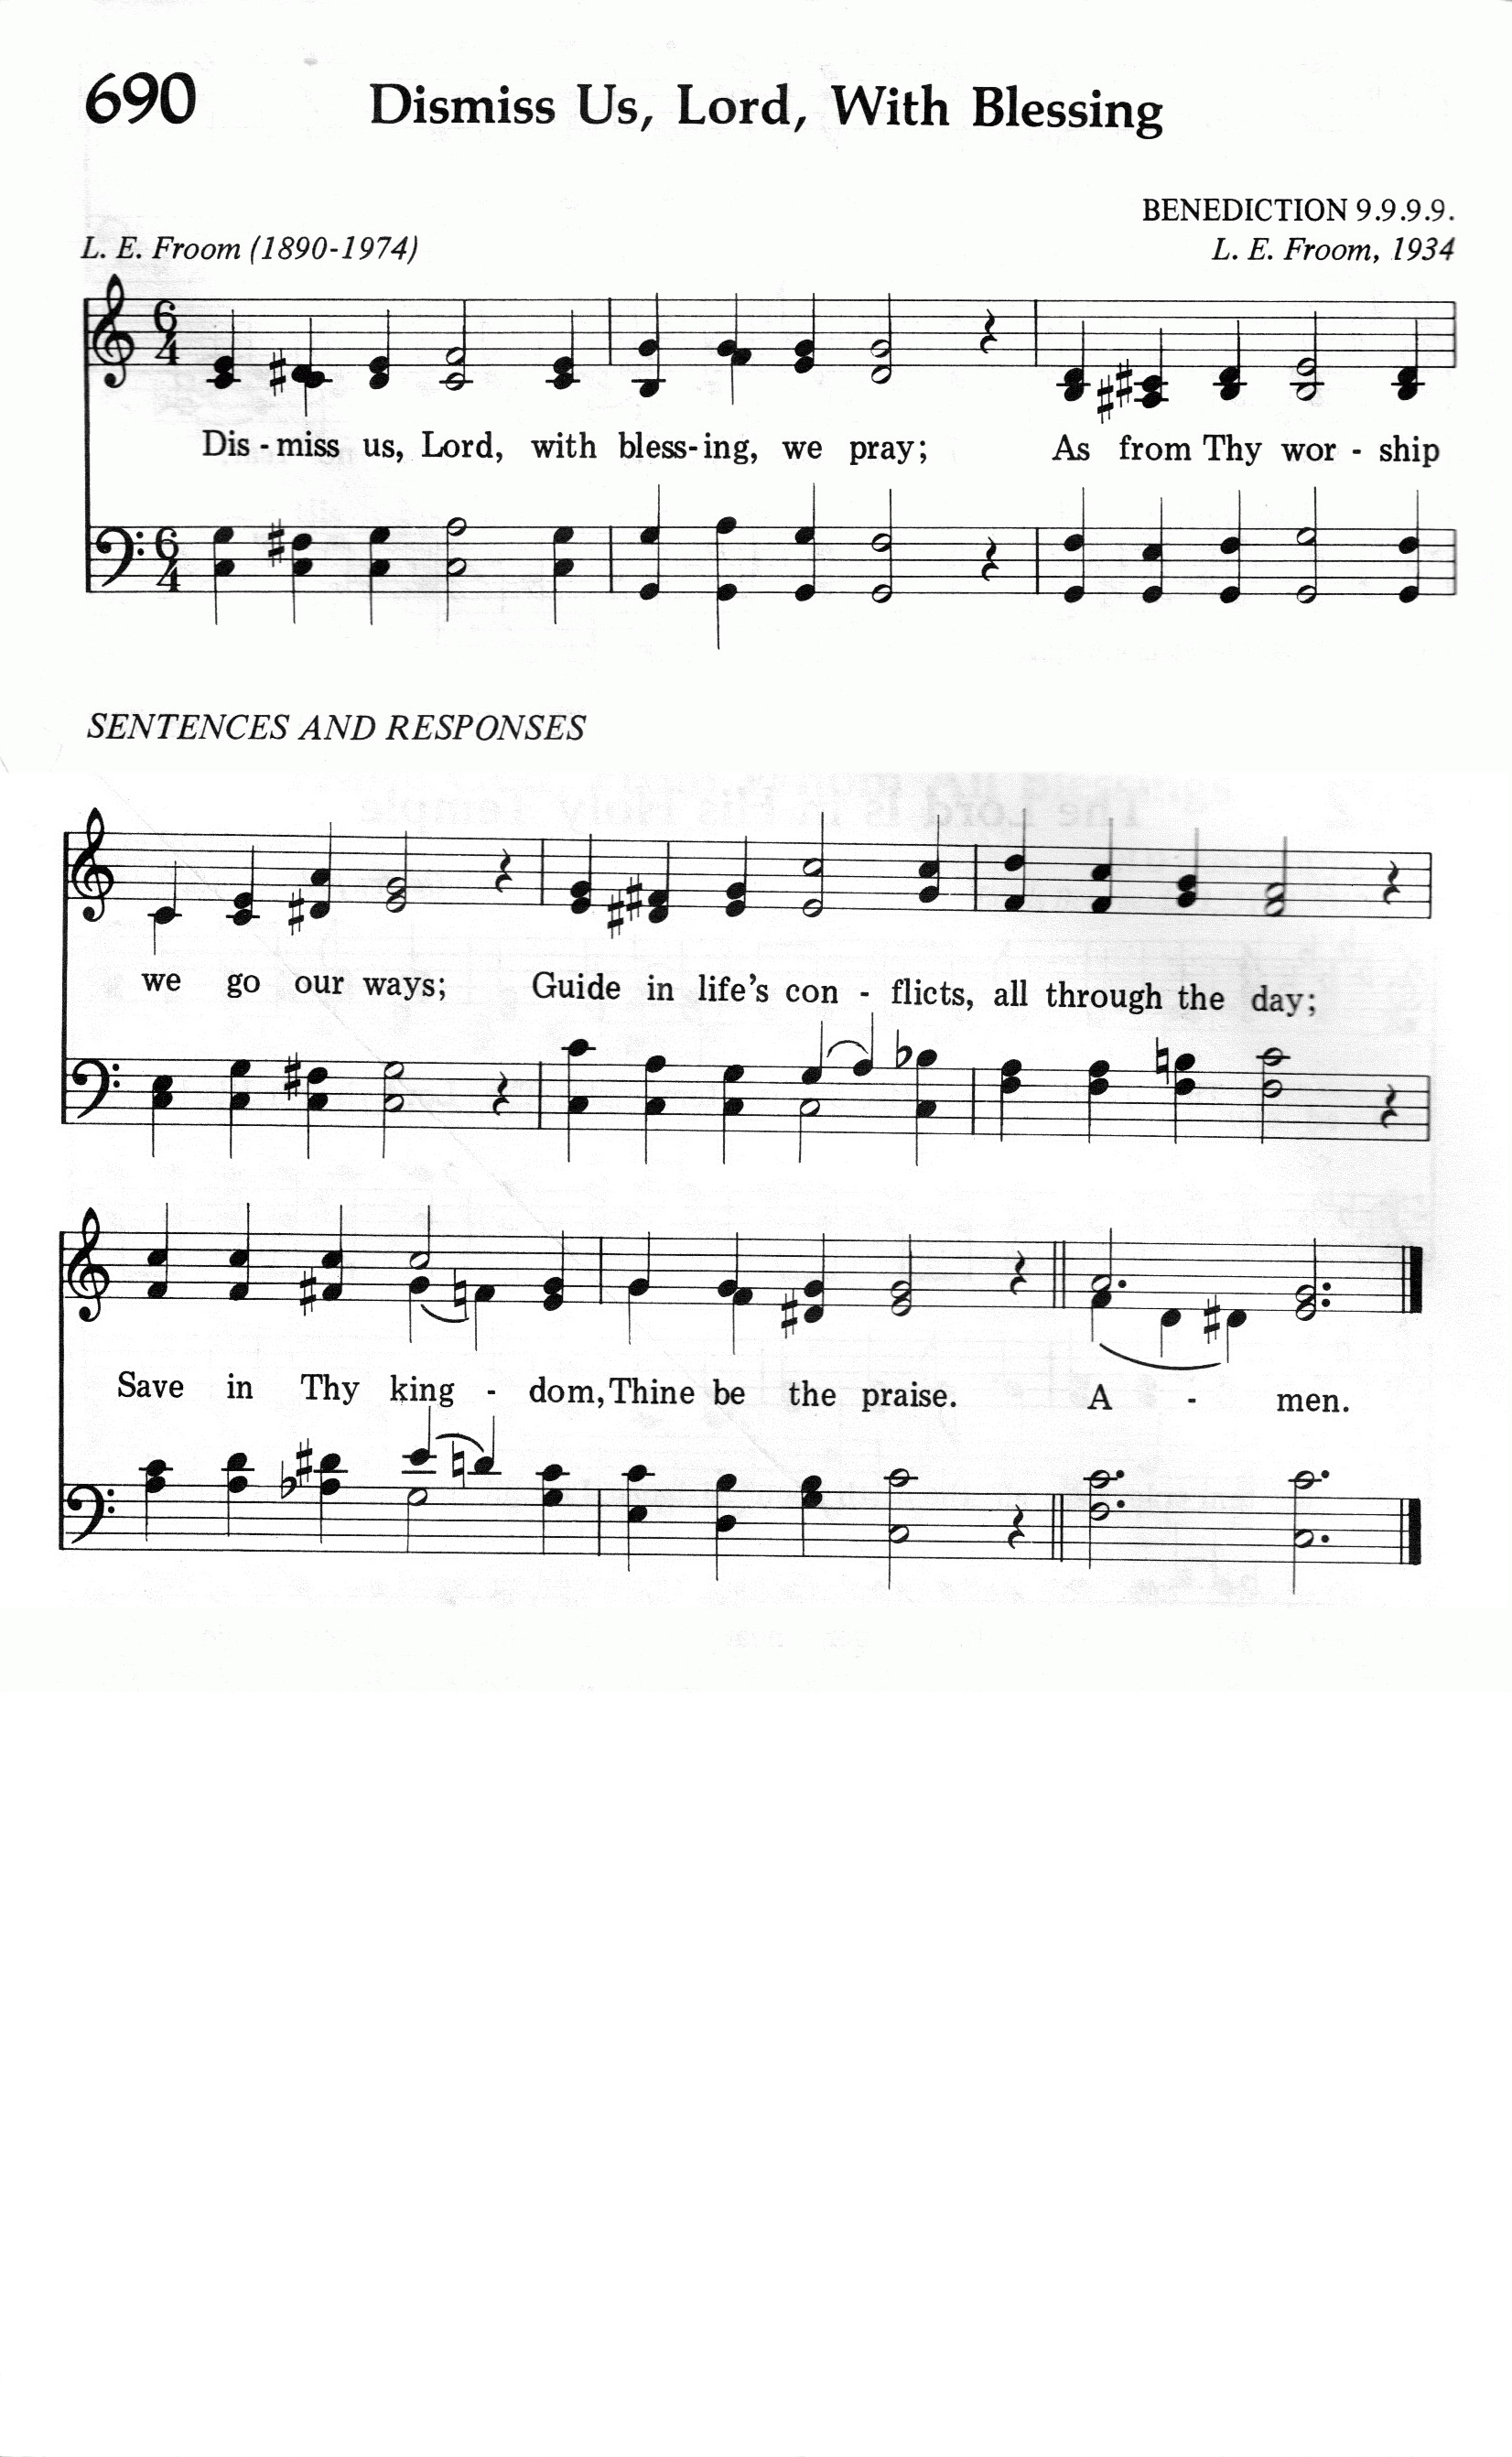 690.Dismiss Us, Lord With Blessing-695HYMN